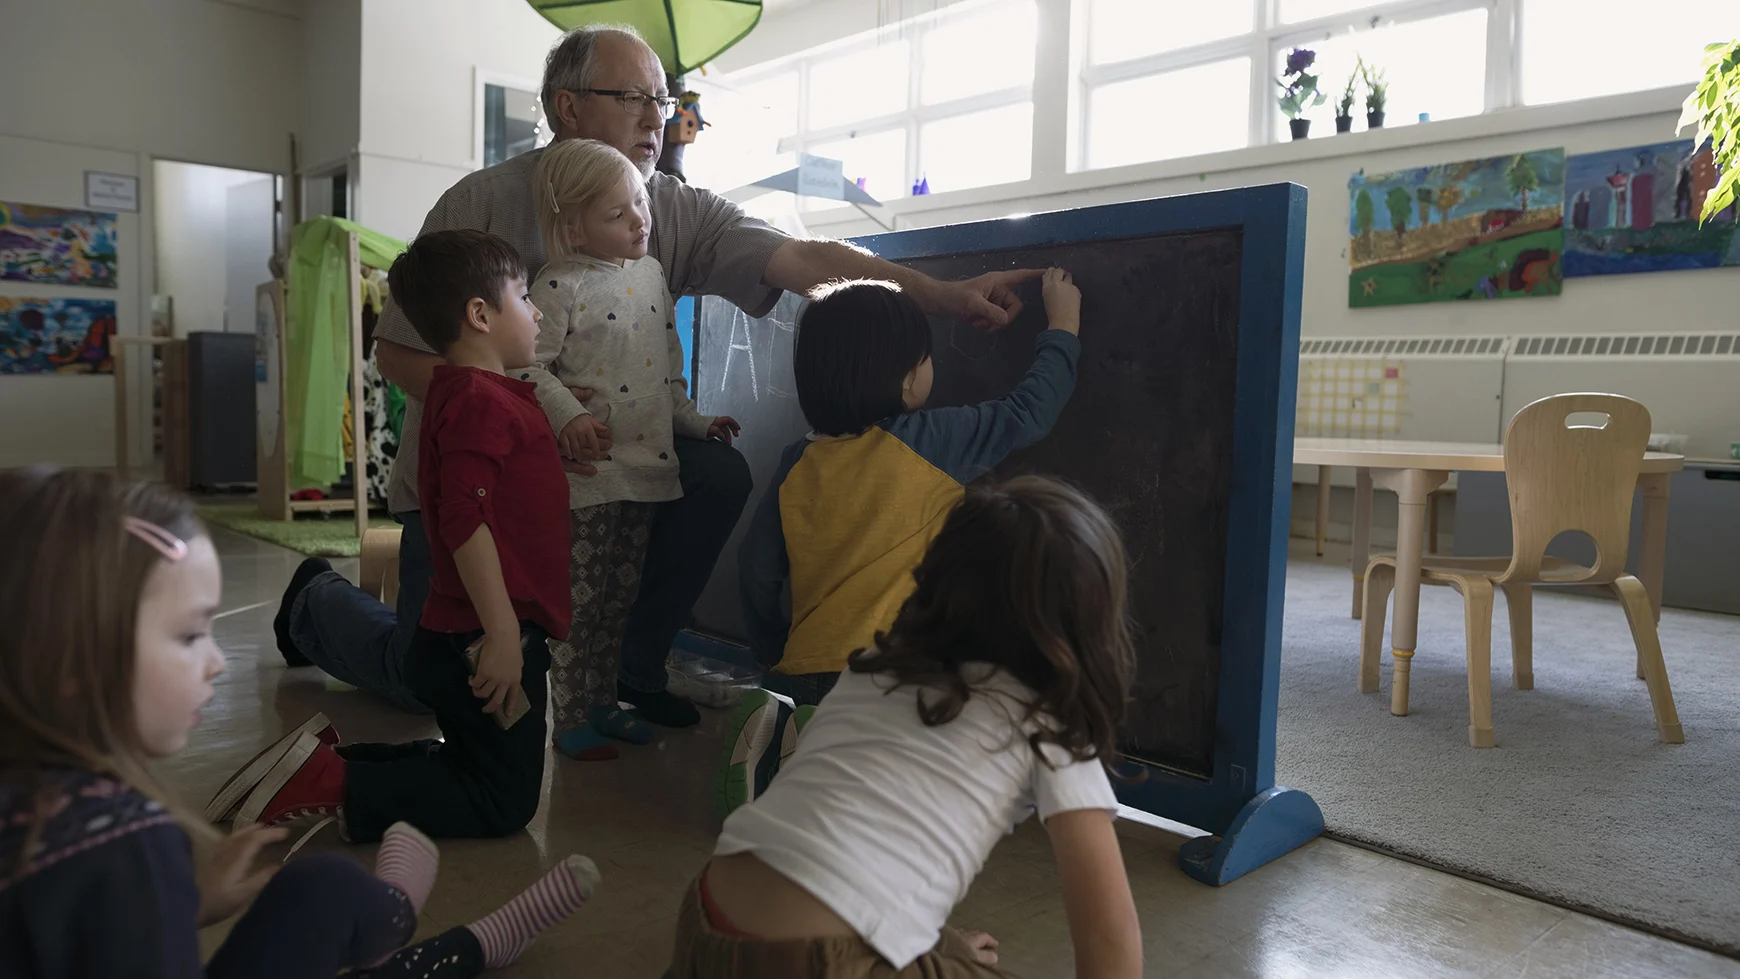 A teacher assists a student in writing on a blackboard. Four other students are watching, while one student is looking away.